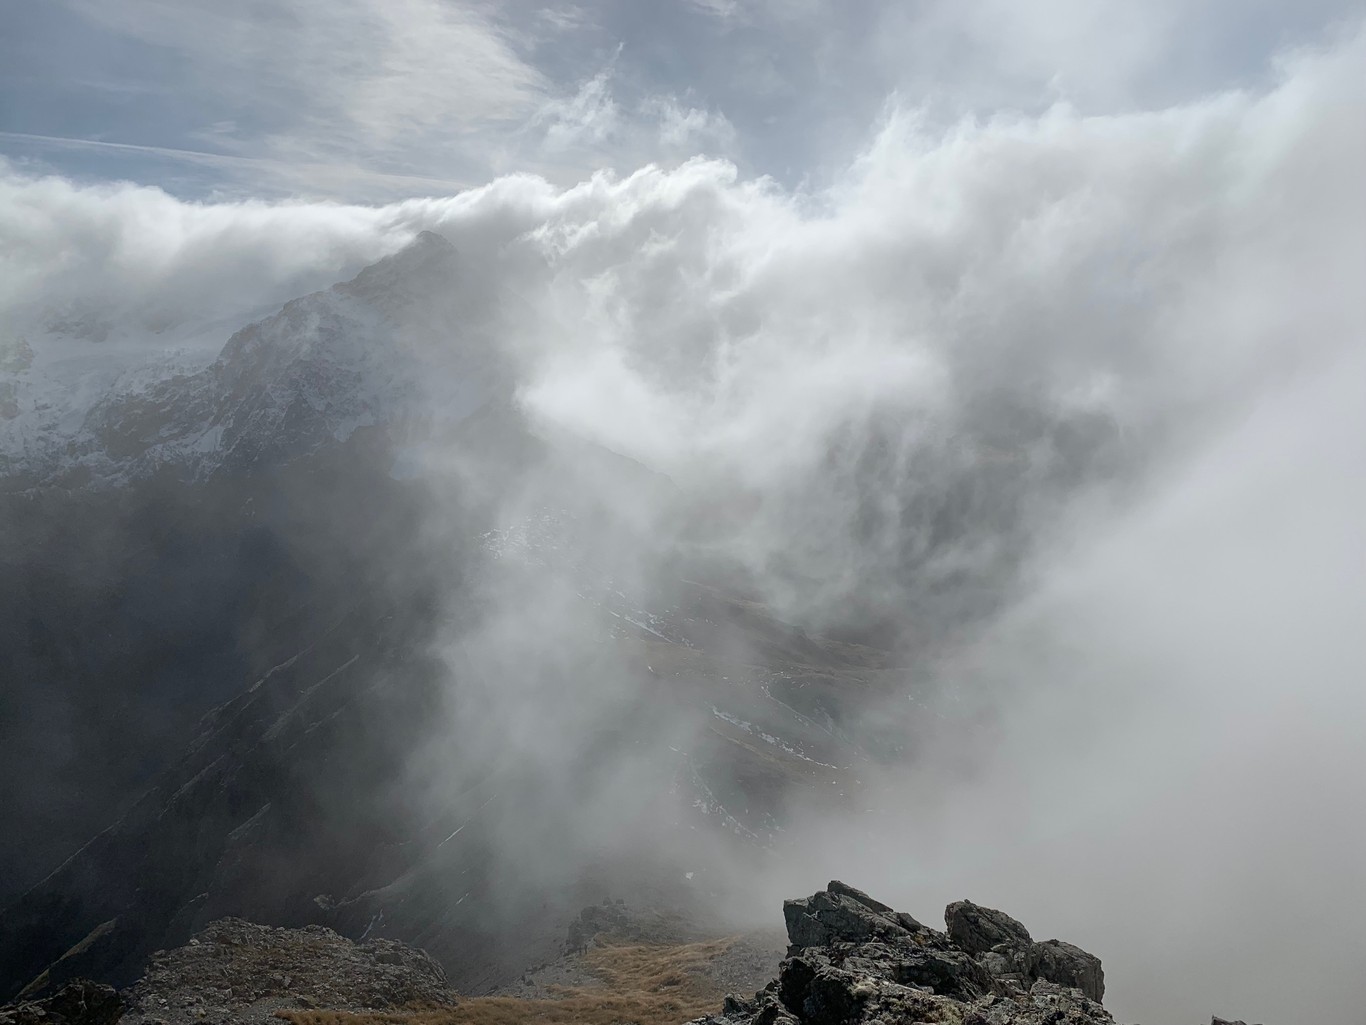 A view of an alpine ridge shrouded in clouds, with rocky, snow-covered peaks in the distance